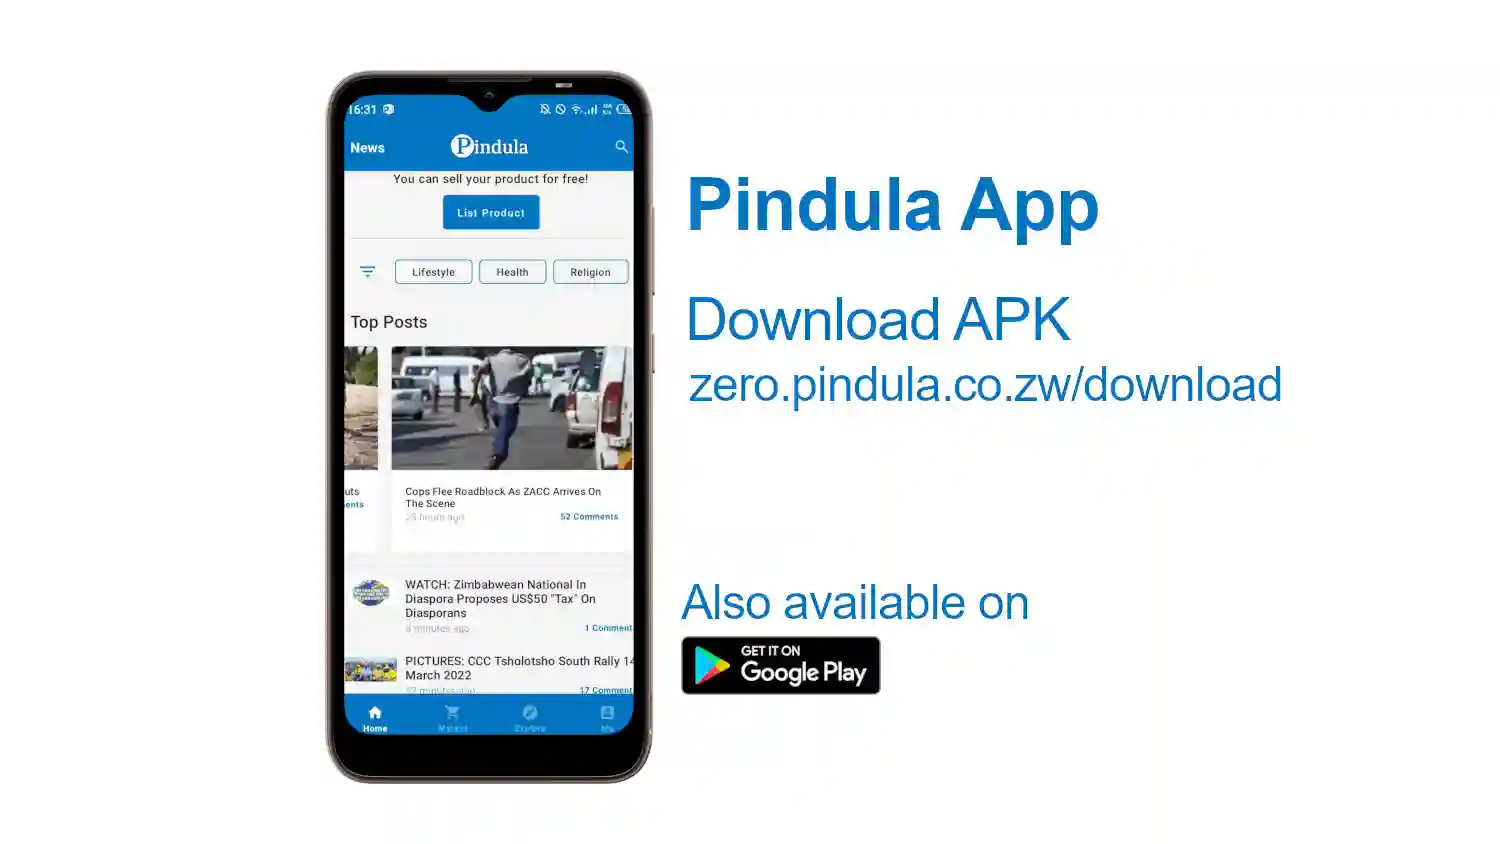 Pindula App Has A New Version. Here's How To Download It